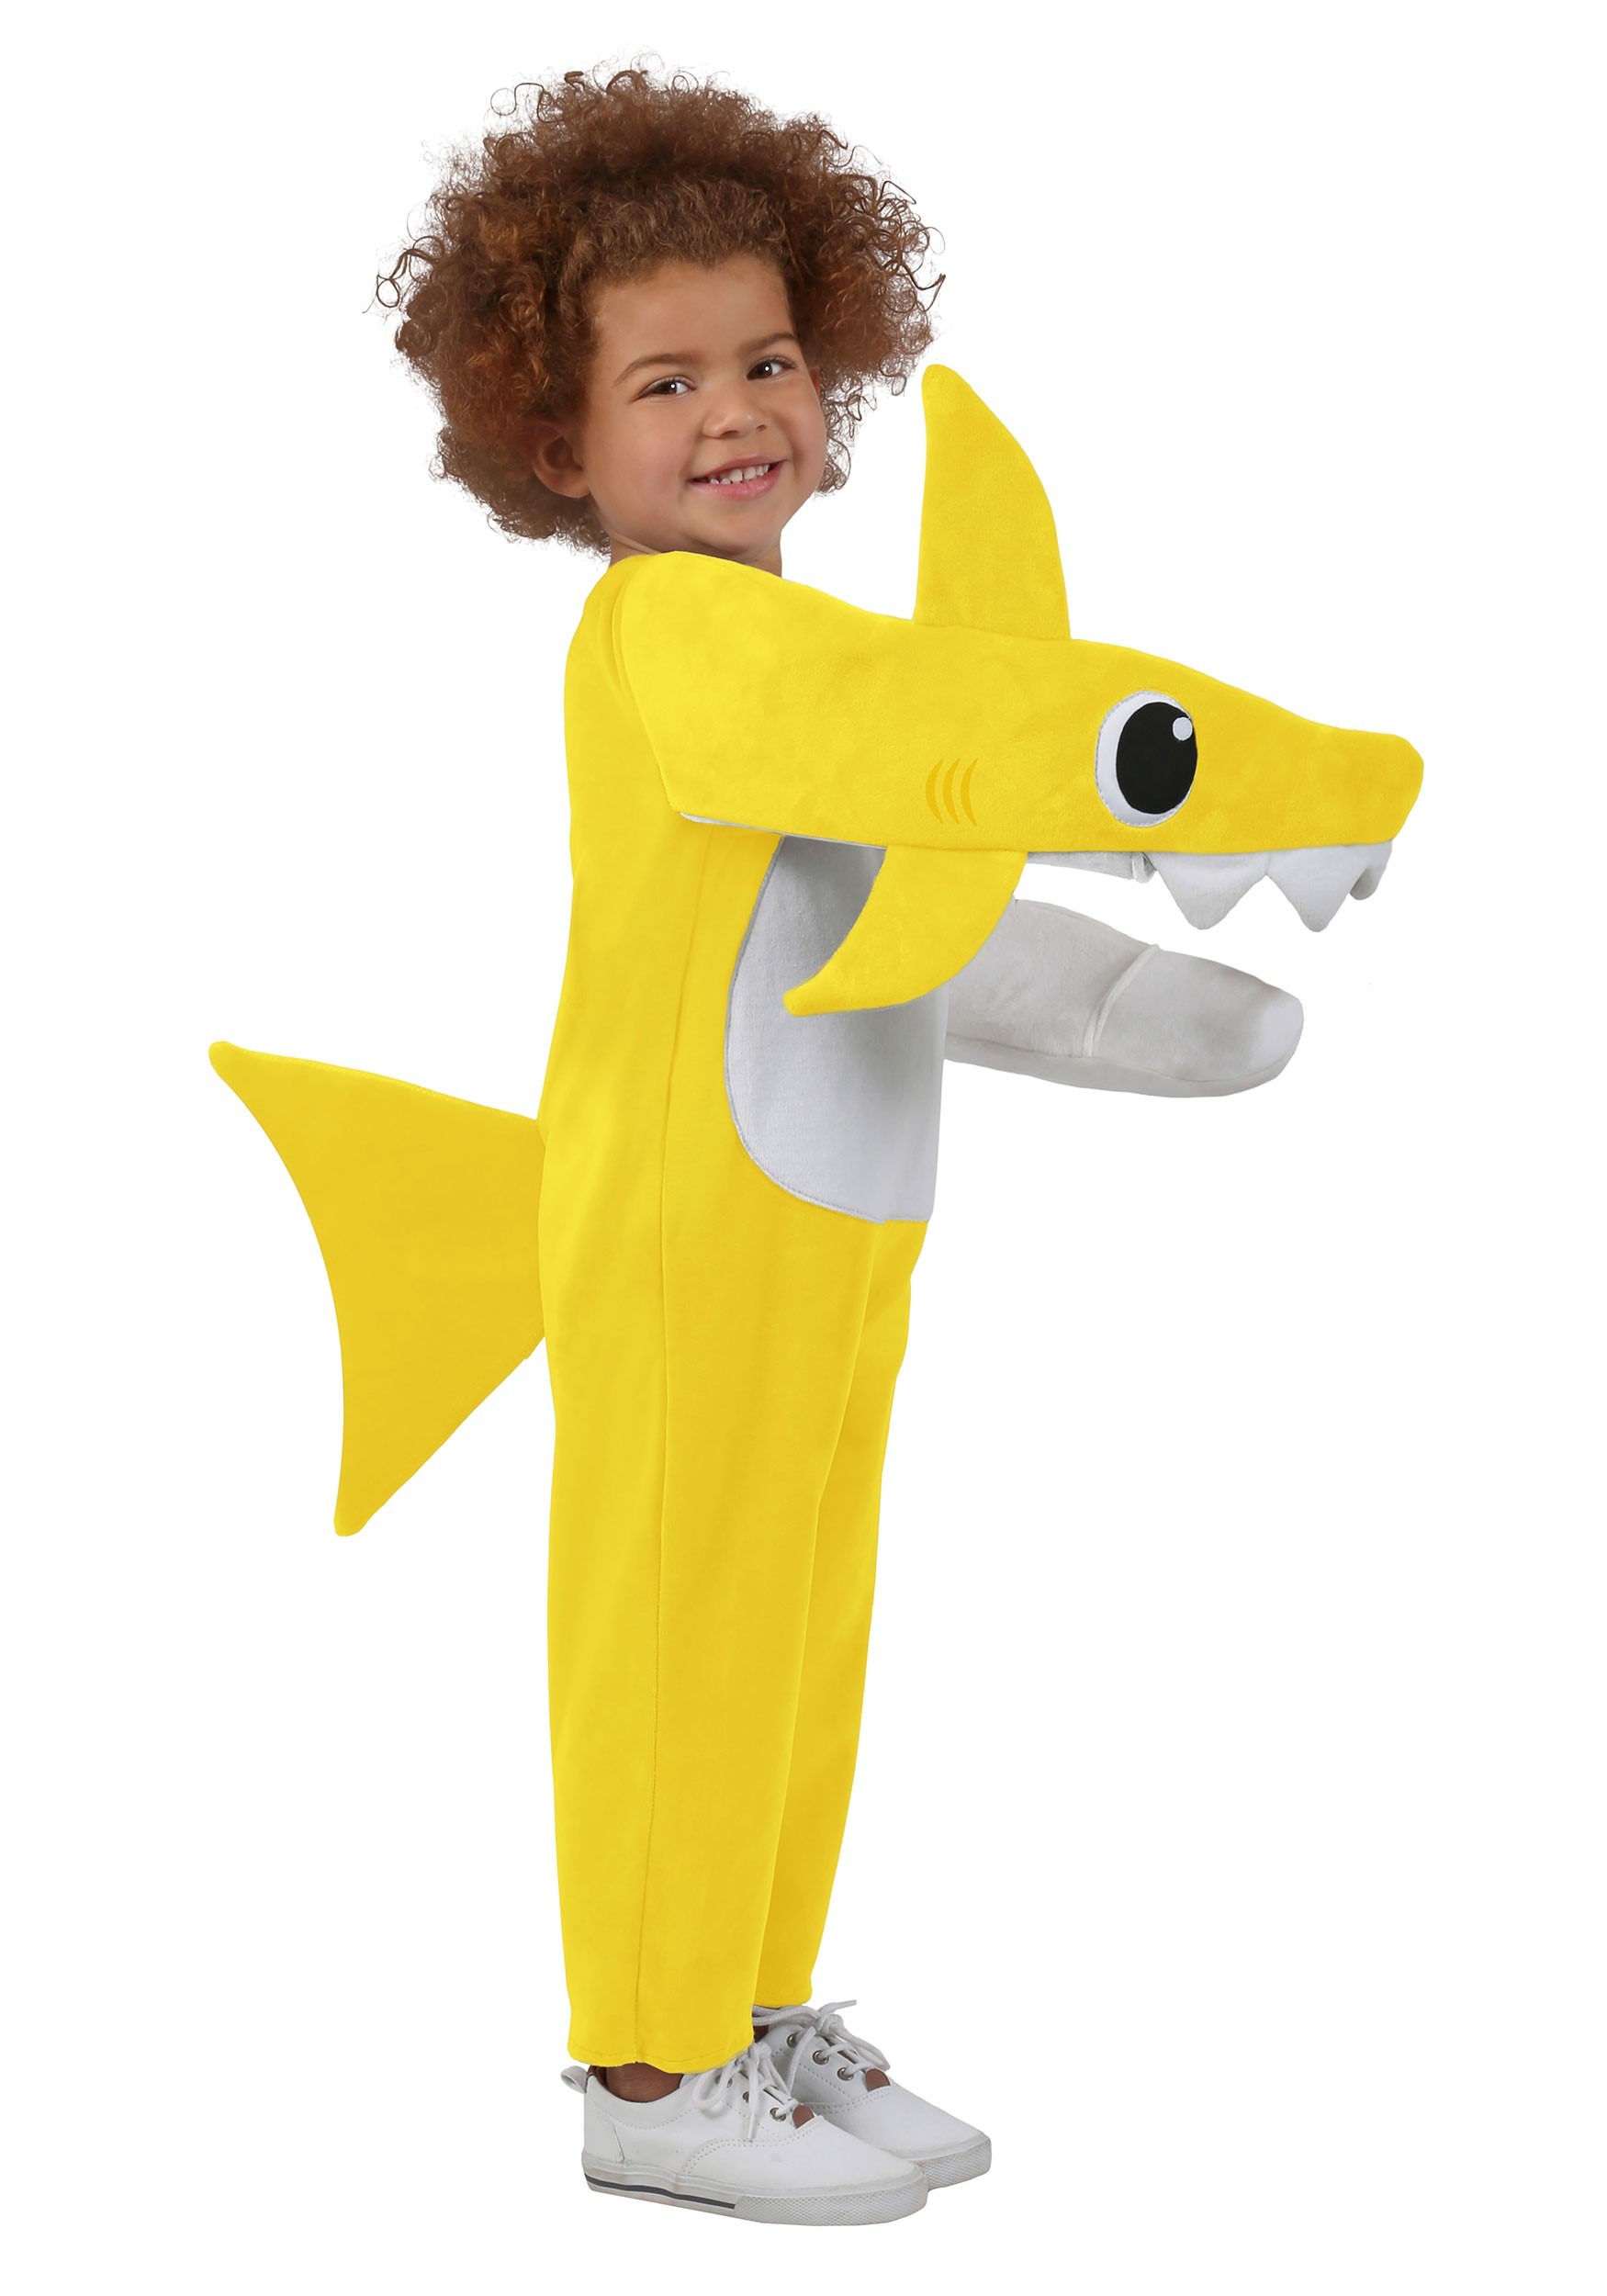 Unisex Baby Shark Costume For A Child